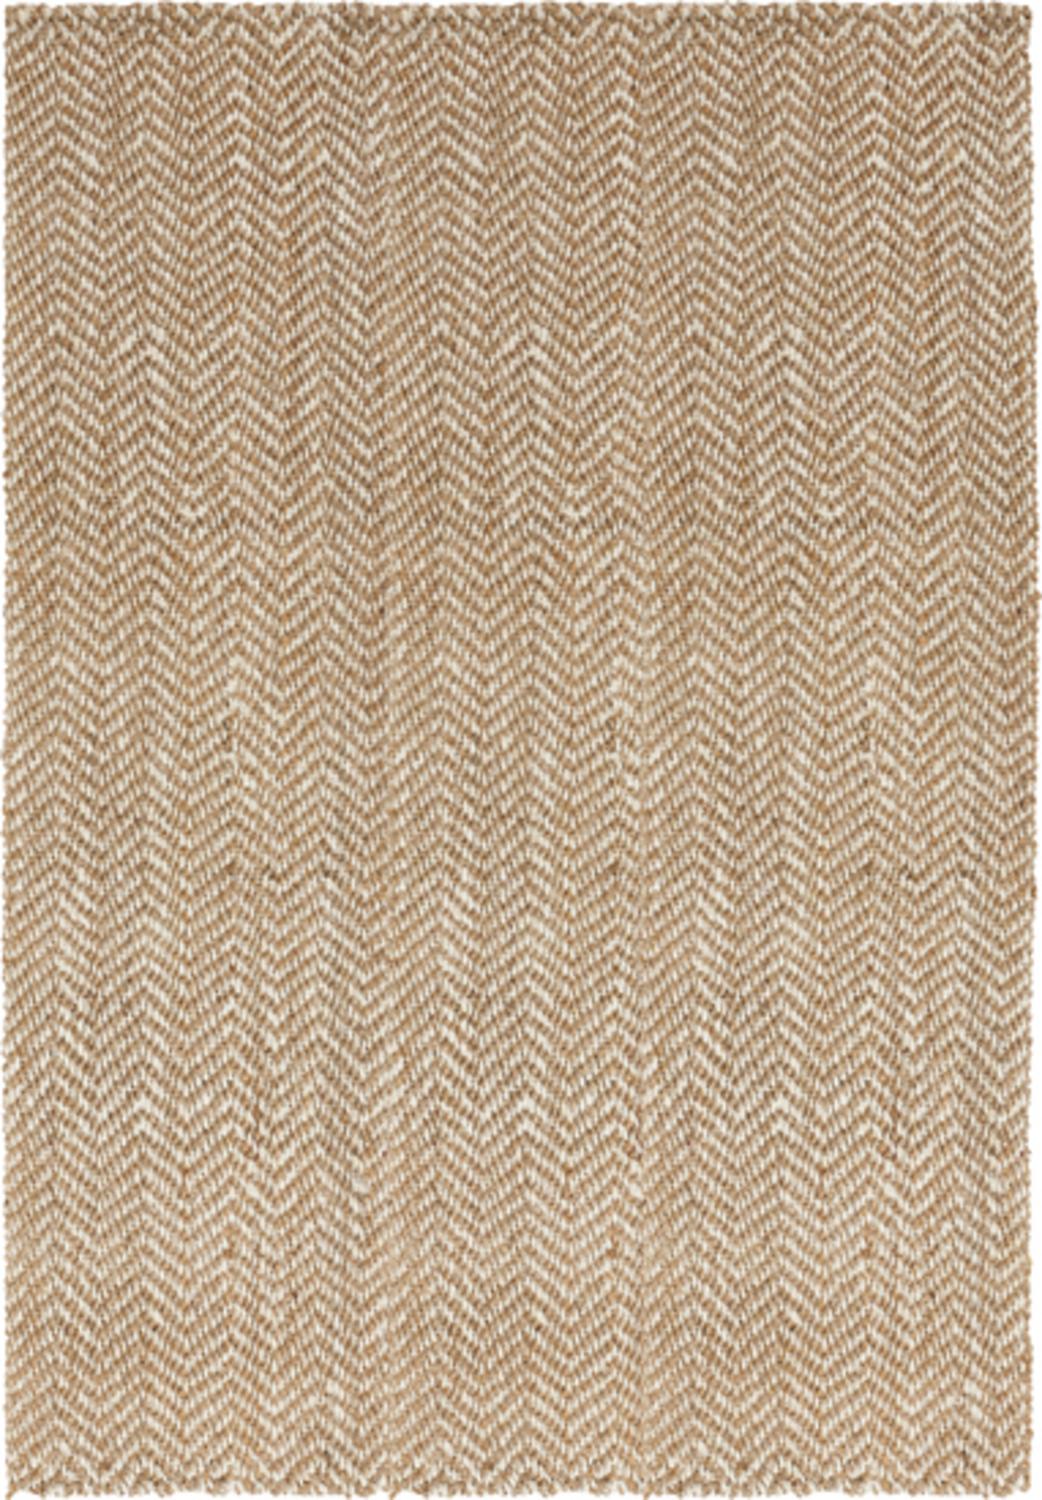 Diva At Home  8' x 11' Moroccan Chevron Beige and Ivory Hand Woven Jute Area Throw Rug